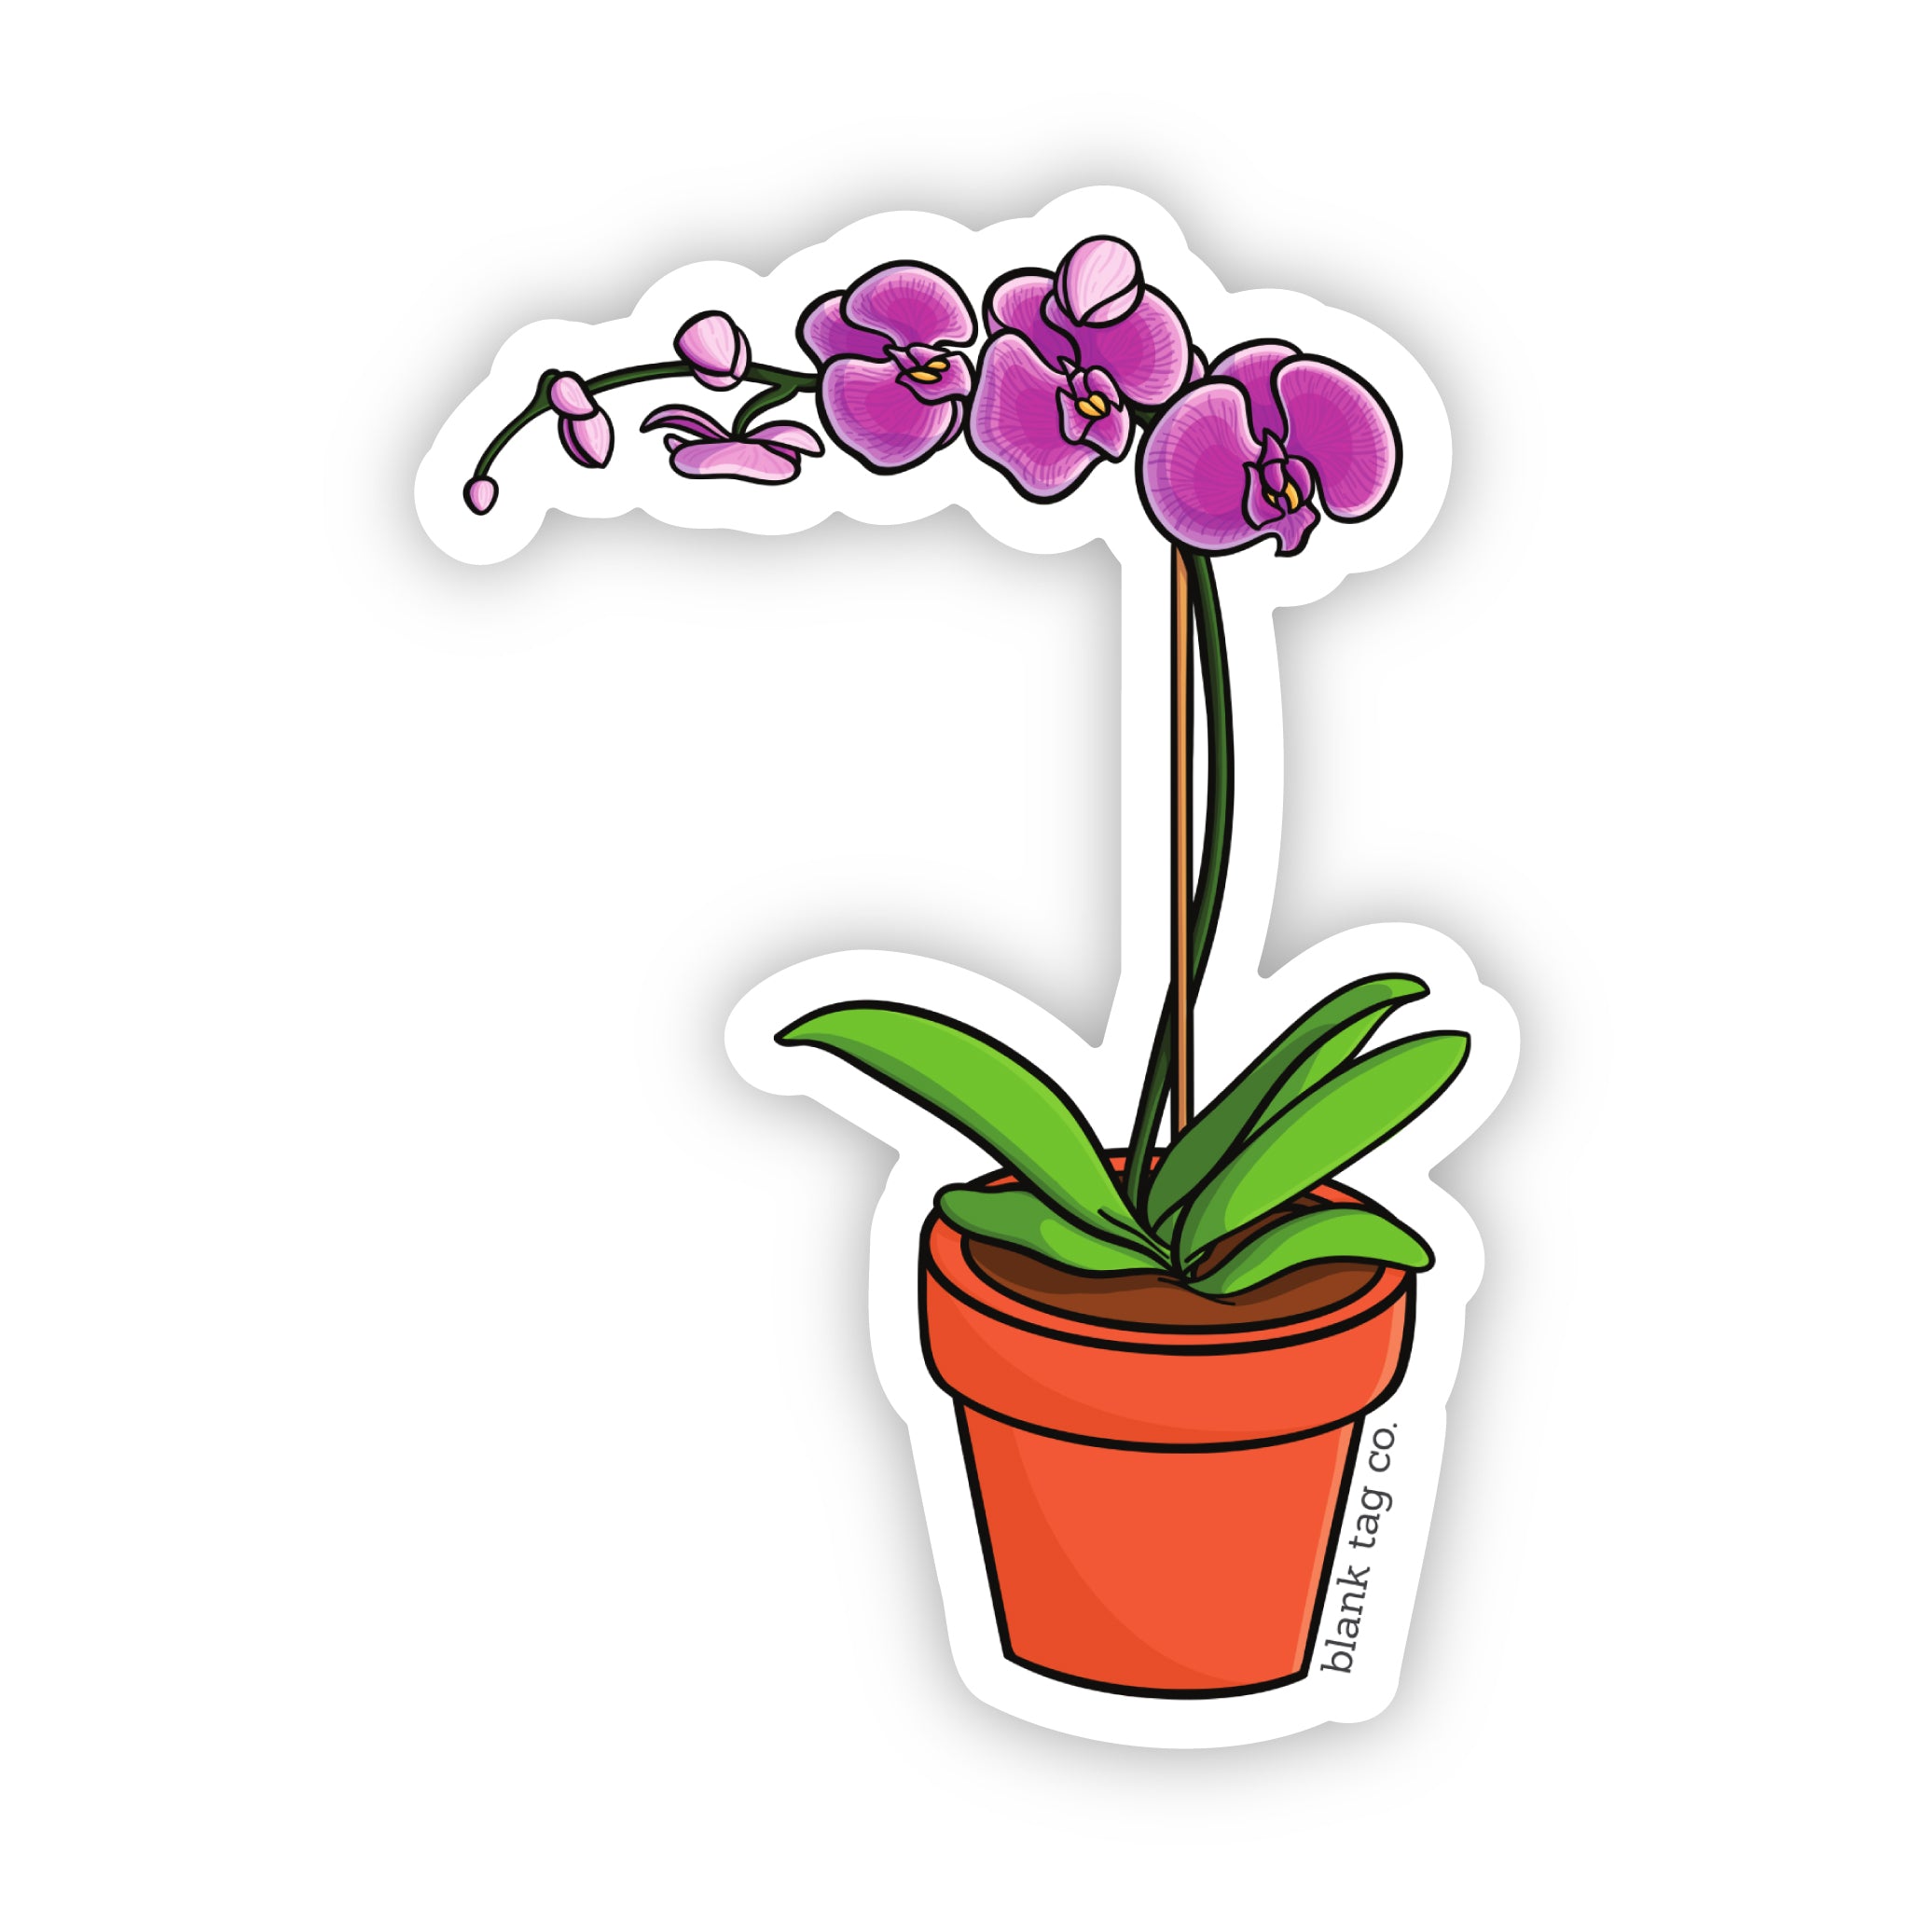 The Orchid Sticker